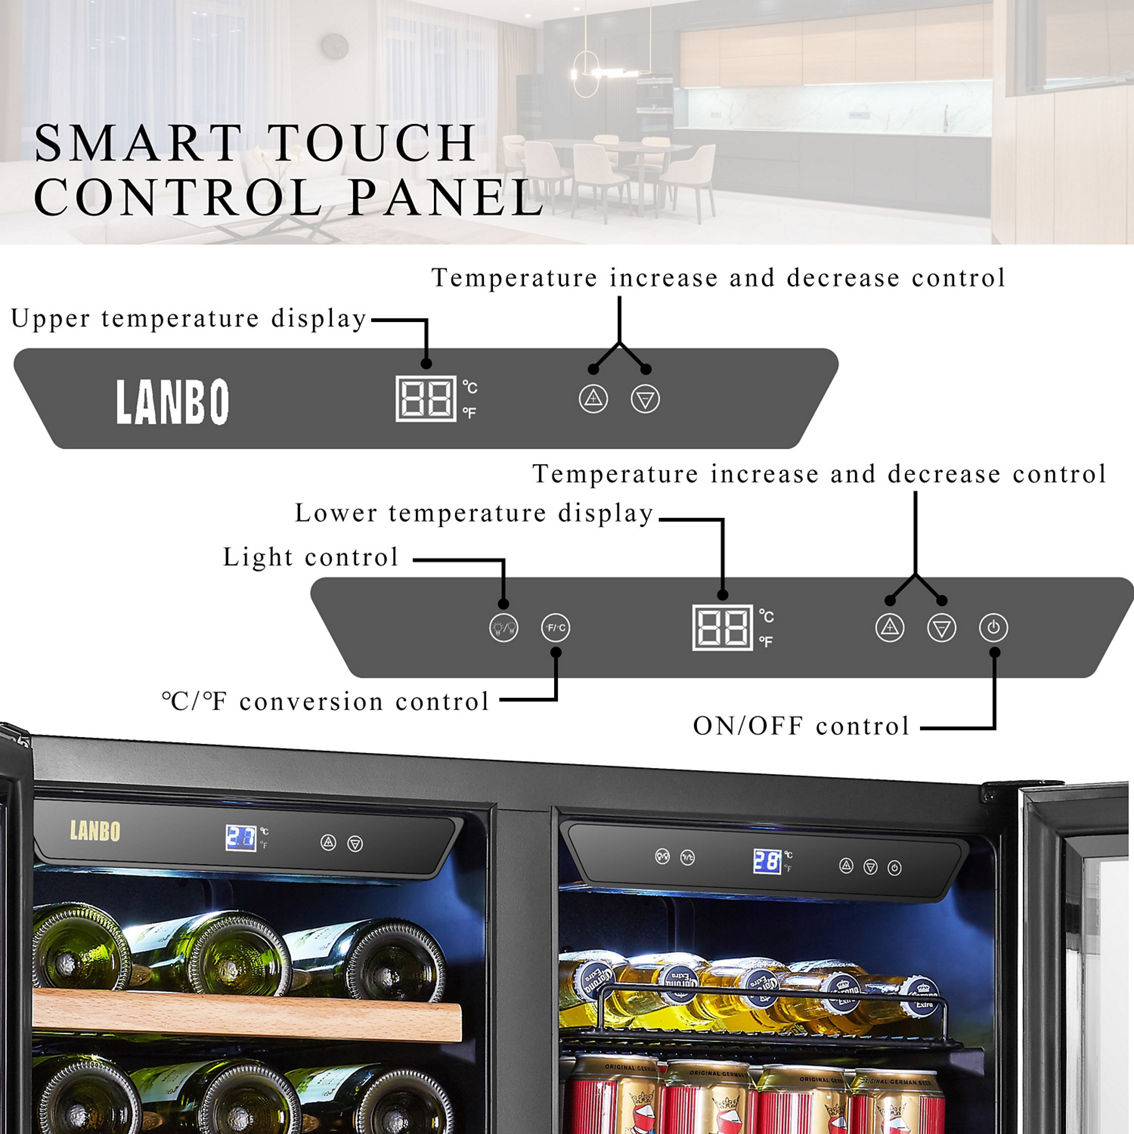 Lanbo 30 Inch Wine and Beverage Cooler, 31 Bottle and 76 Can - Image 3 of 5